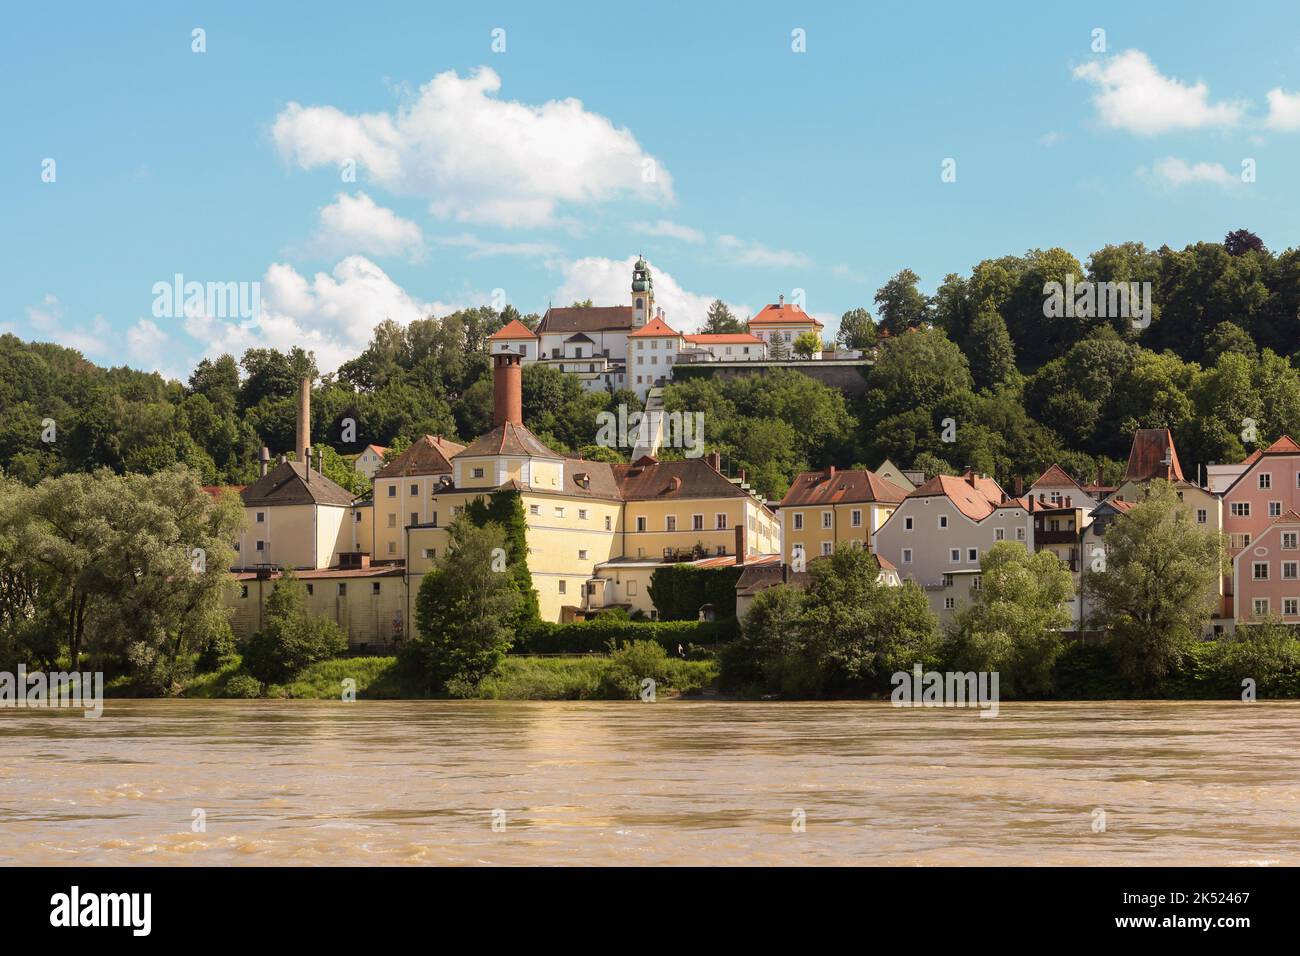 Passau city on the river Inn with a view of a monastery Stock Photo